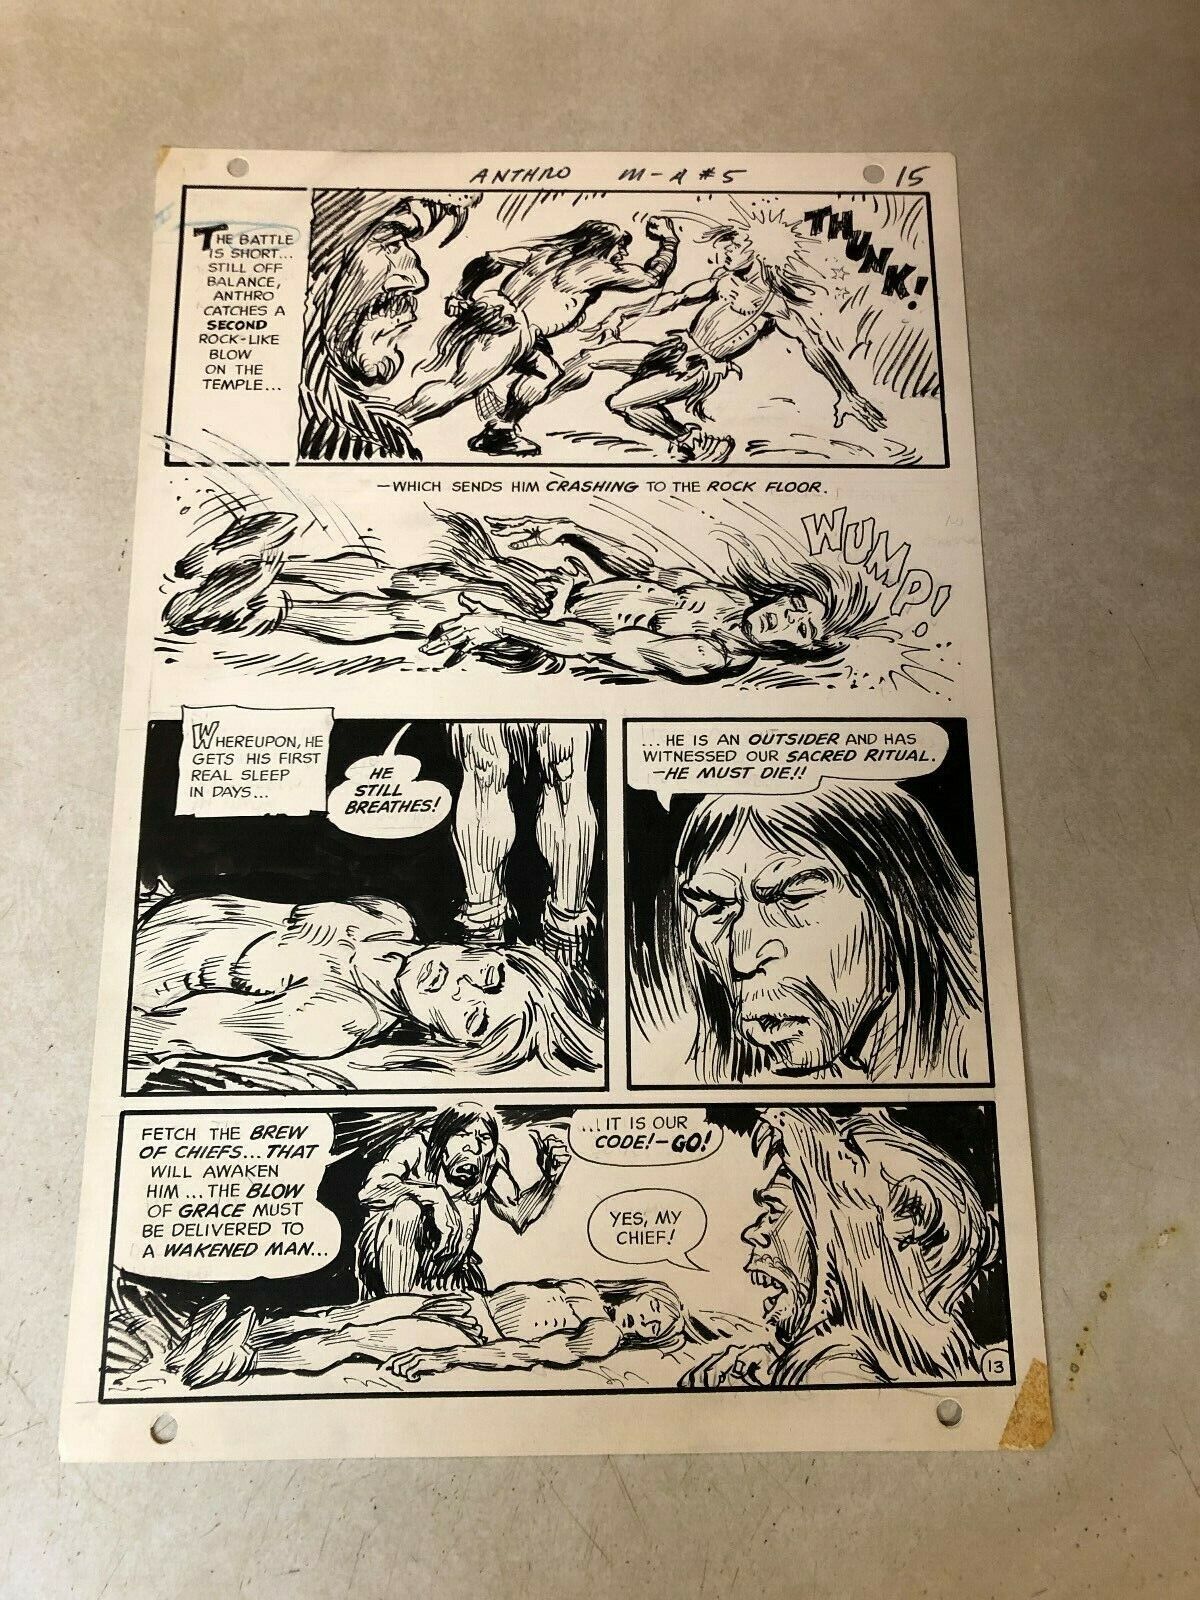 ANTHRO #5 original art 1969 PUNCH TO FACE knocked out BREW 1969 POST Dc